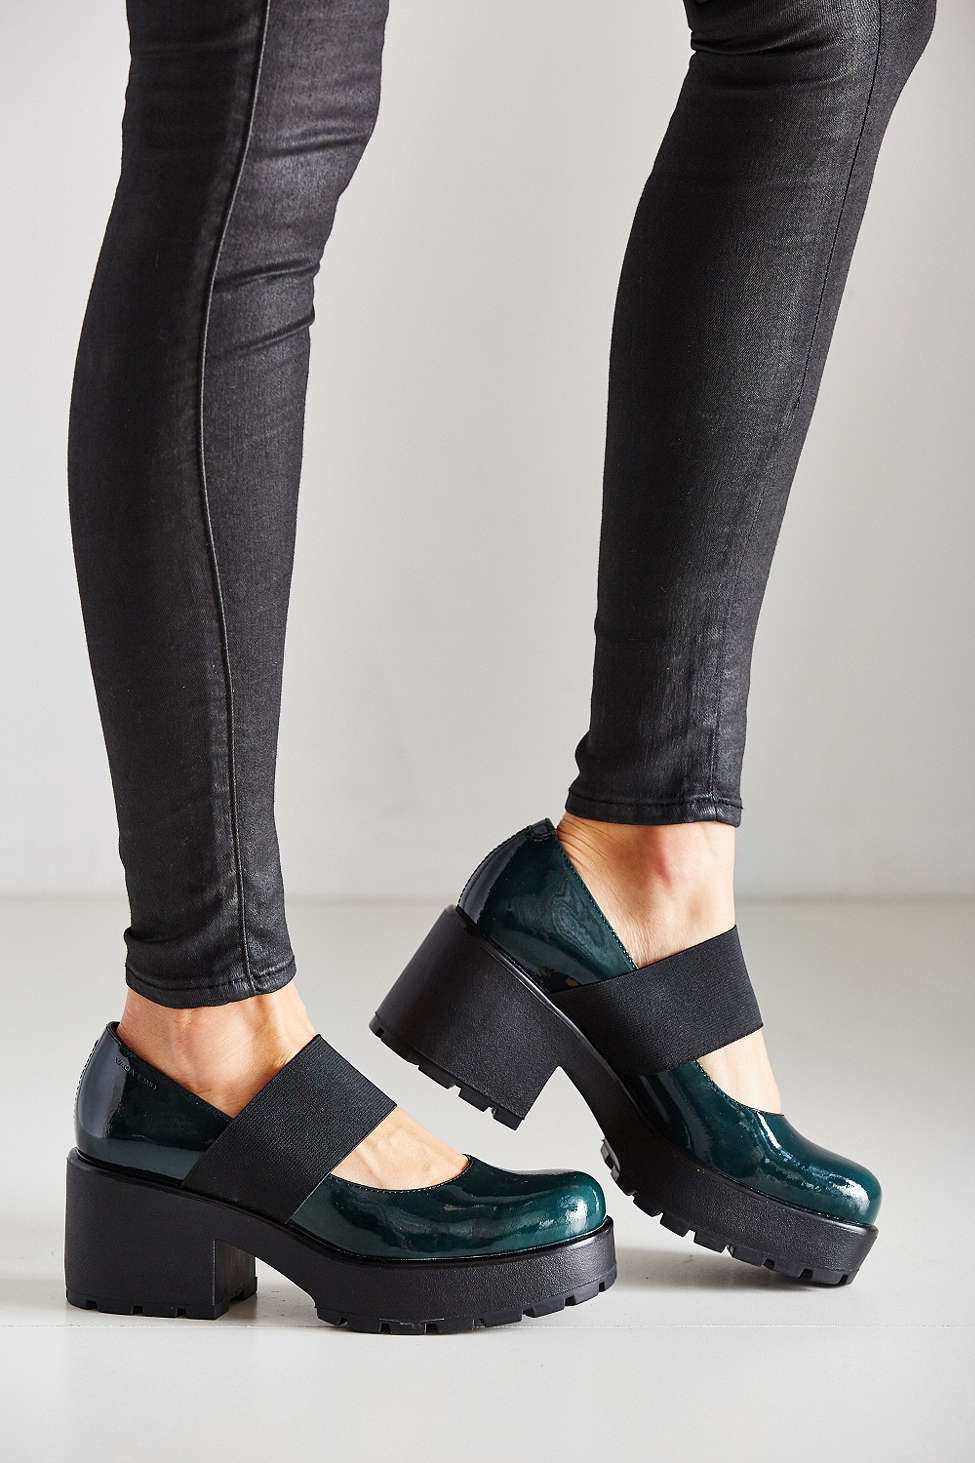 Lyst - Vagabond Dioon Mary Jane Shoe in Green